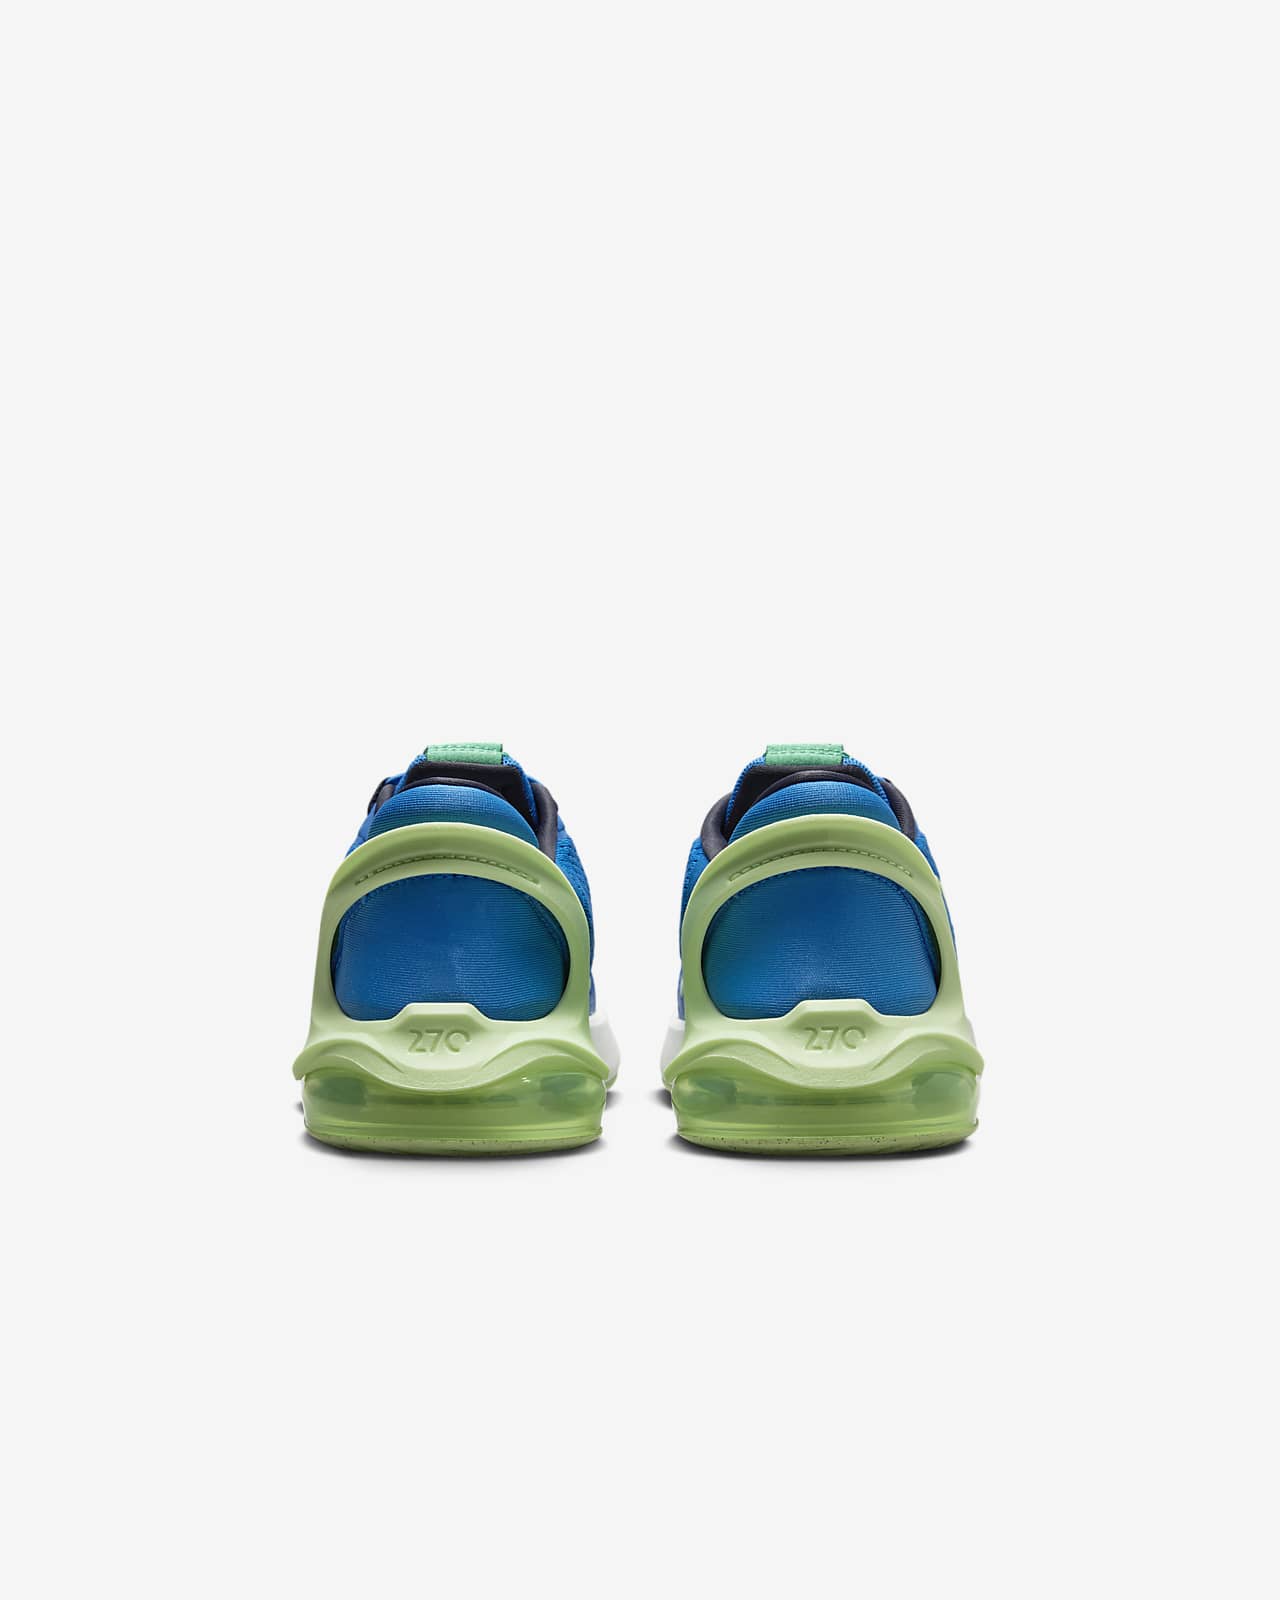 Nike Air Max 270 GO Baby/Toddler Easy On/Off Shoes.